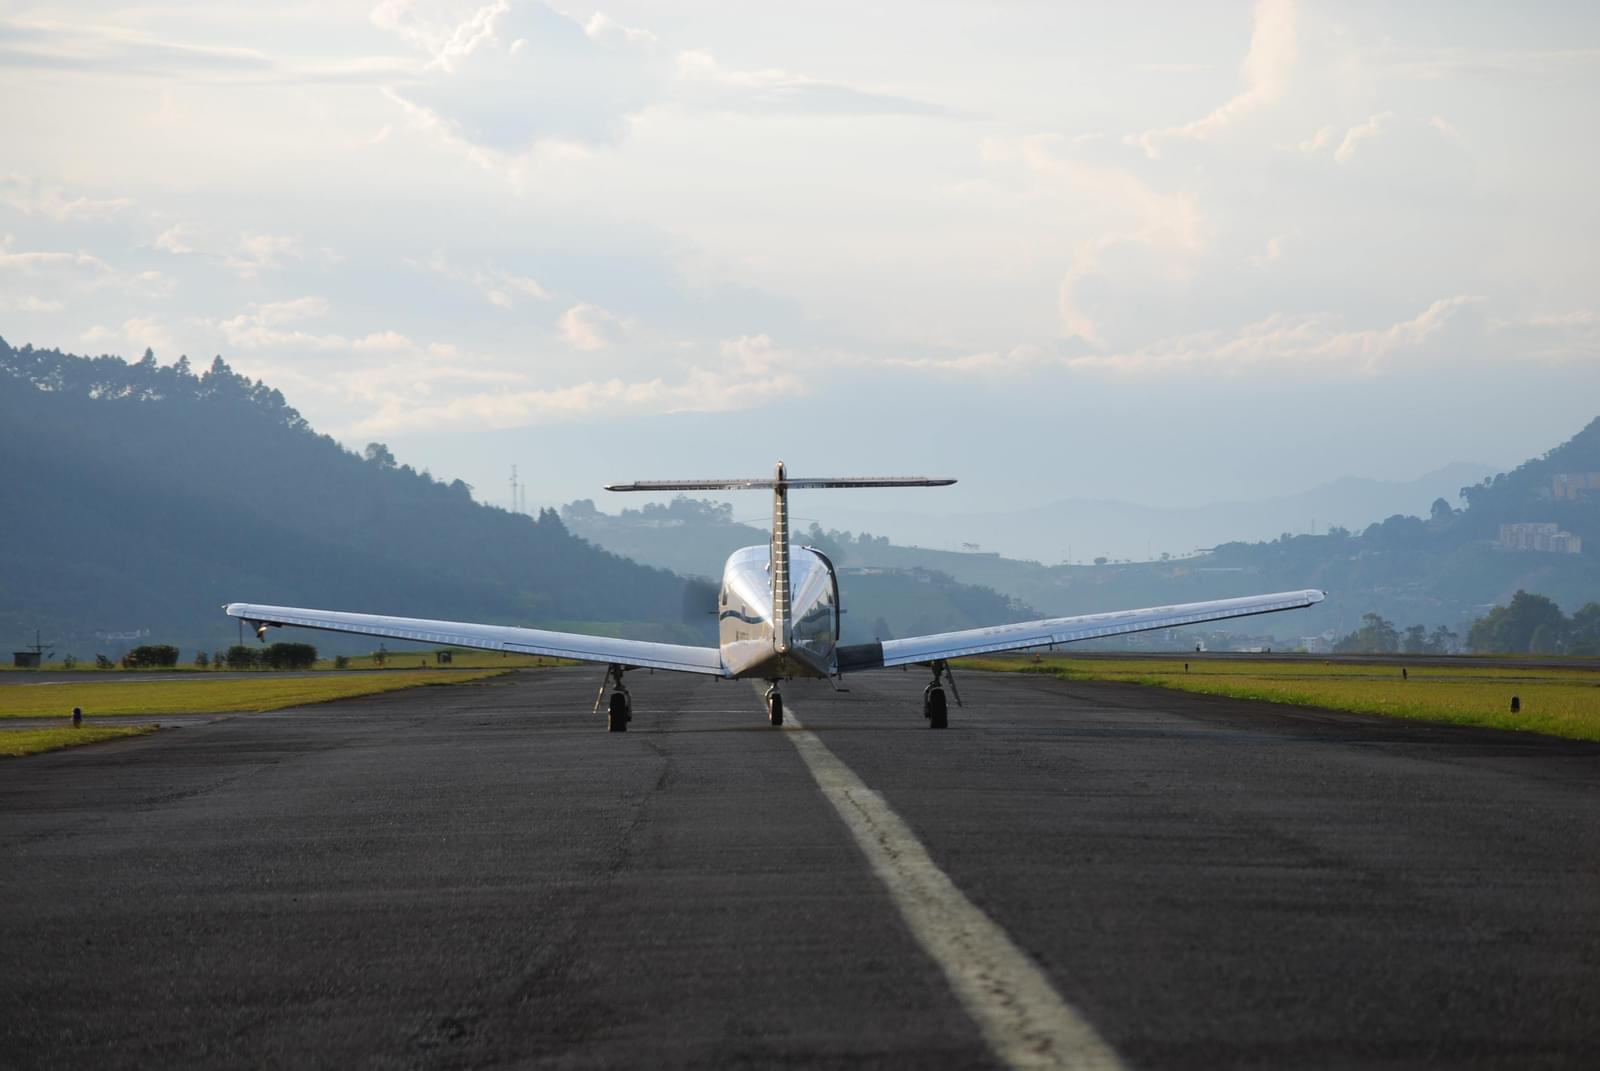 A shiny chrome airplane gets ready to launch into flight on a runway. The runway is surrounded by bright green grass and a beautiful mountainscape is in the background, in the direction the plane is taking off into.